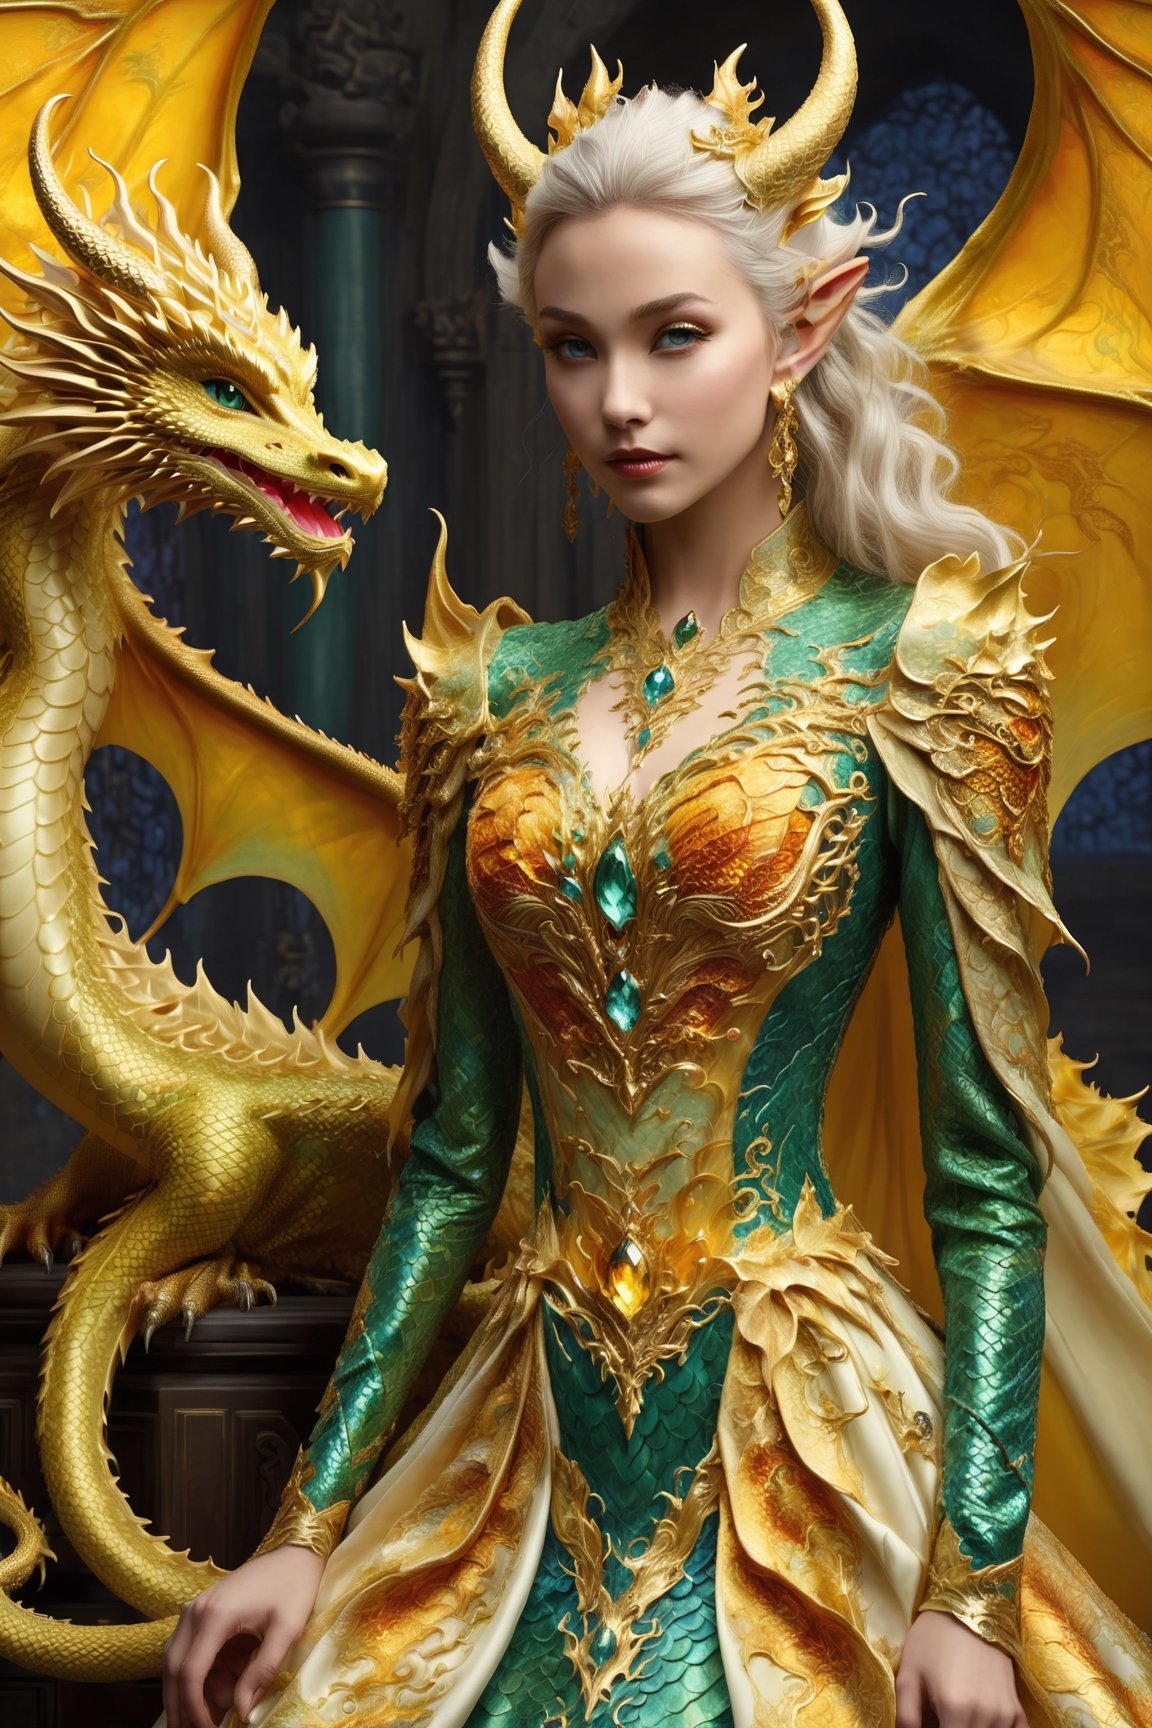 alabaster skin, mystical being, born of the union between a golden dragon and an elf girl,elf ears,Dragon inspired dress,extraordinary creature exhibits both draconic and elven features, blending the elegance of the elves with the majestic presence of dragons, Its scales might shimmer with ethereal colors, and its pointed ears,,DonM3lv3sXL,Disney pixar style,golden dragon